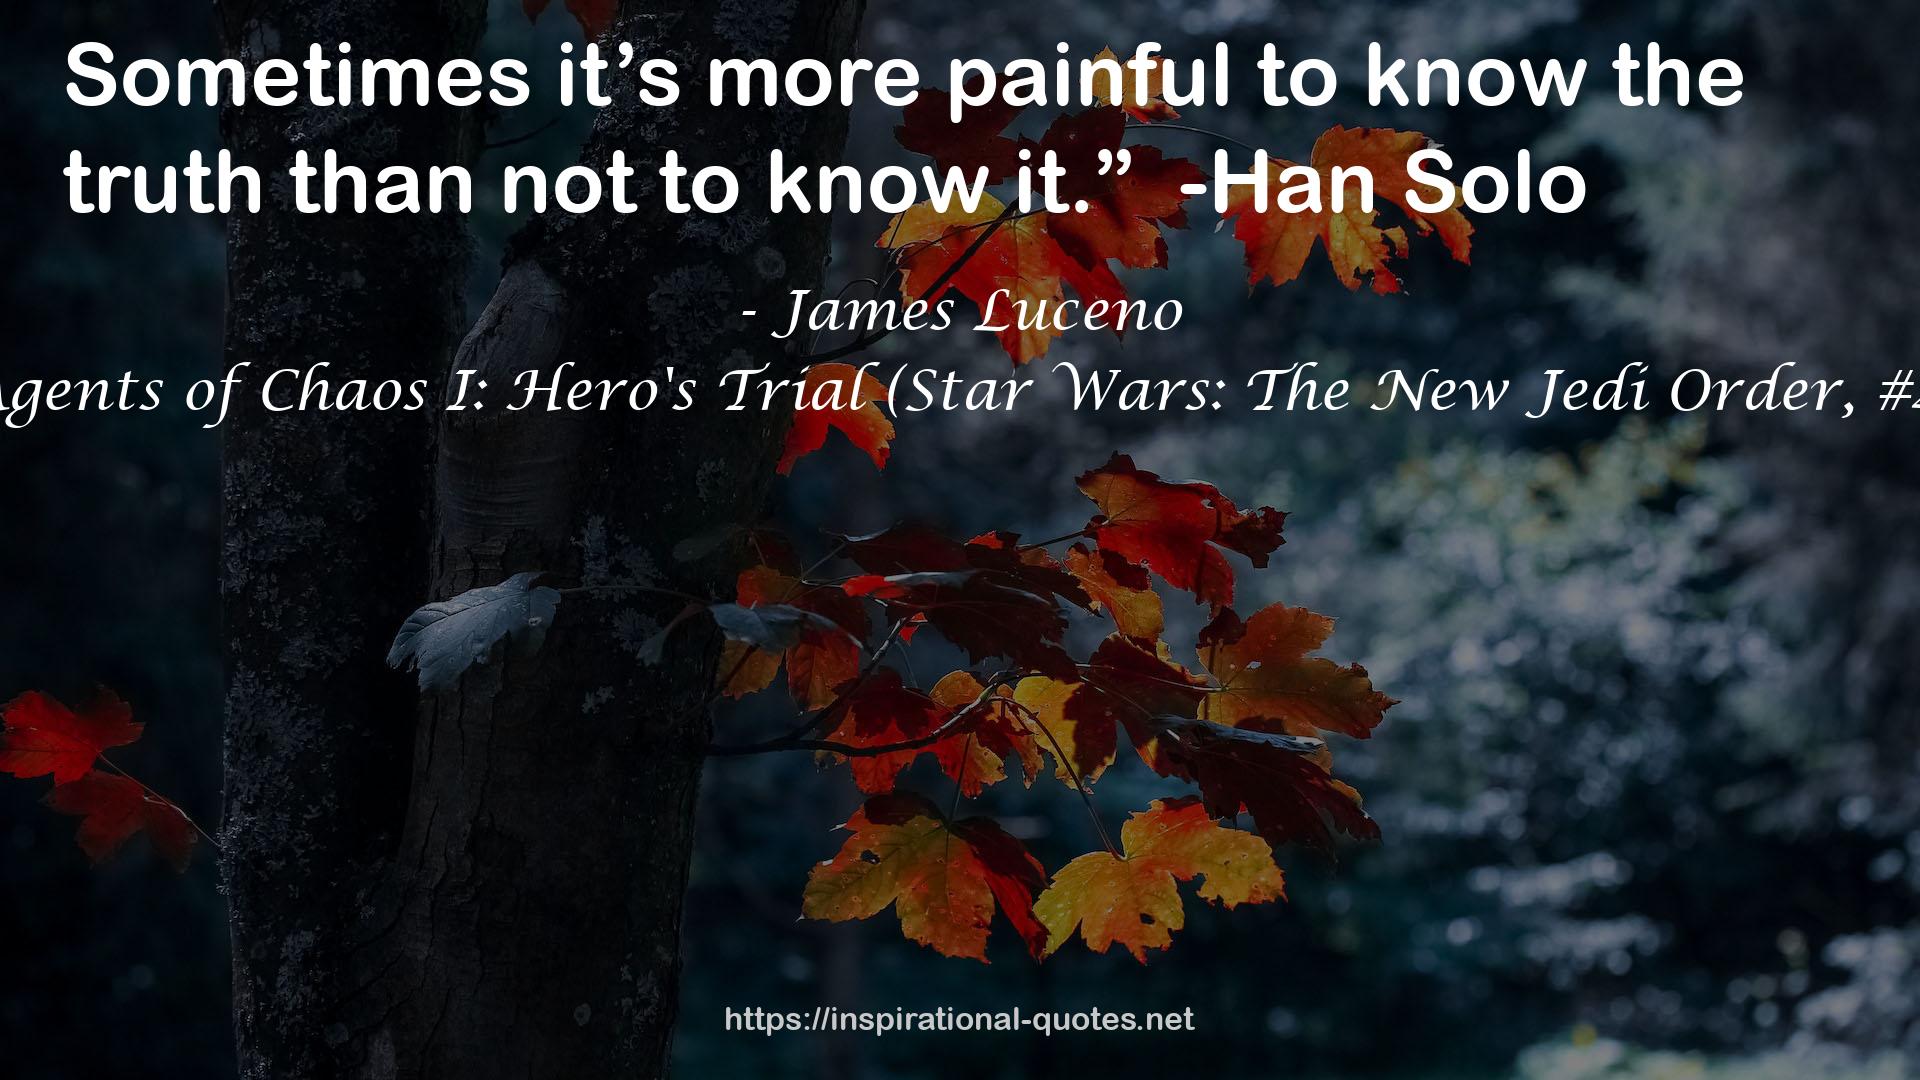 Agents of Chaos I: Hero's Trial (Star Wars: The New Jedi Order, #4) QUOTES